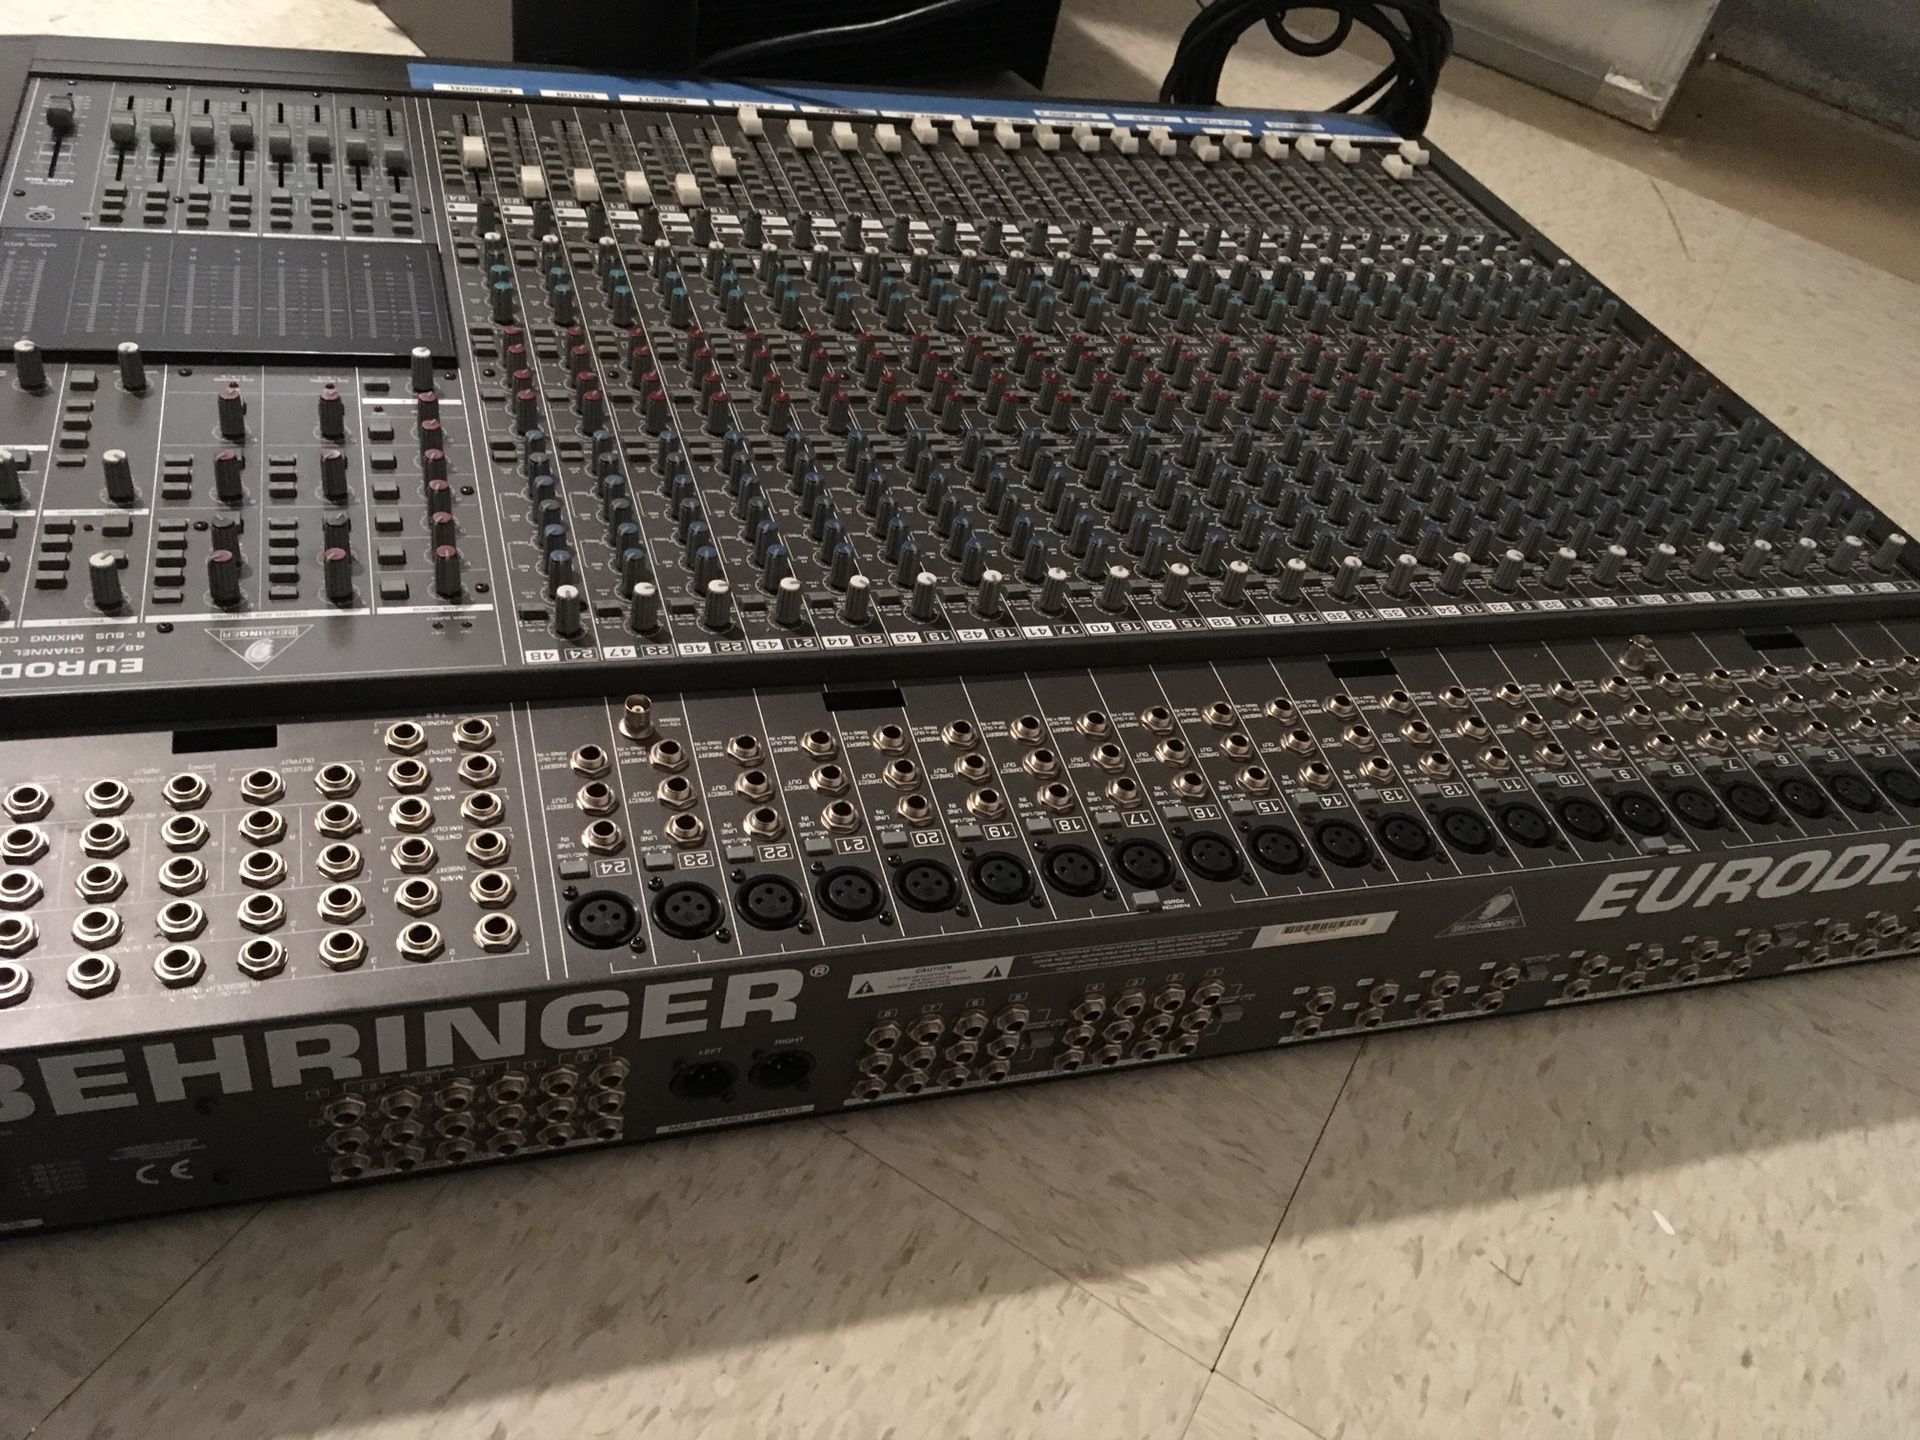 Eurodesk mx8000 48/24 mixing console and 400 watts power supply